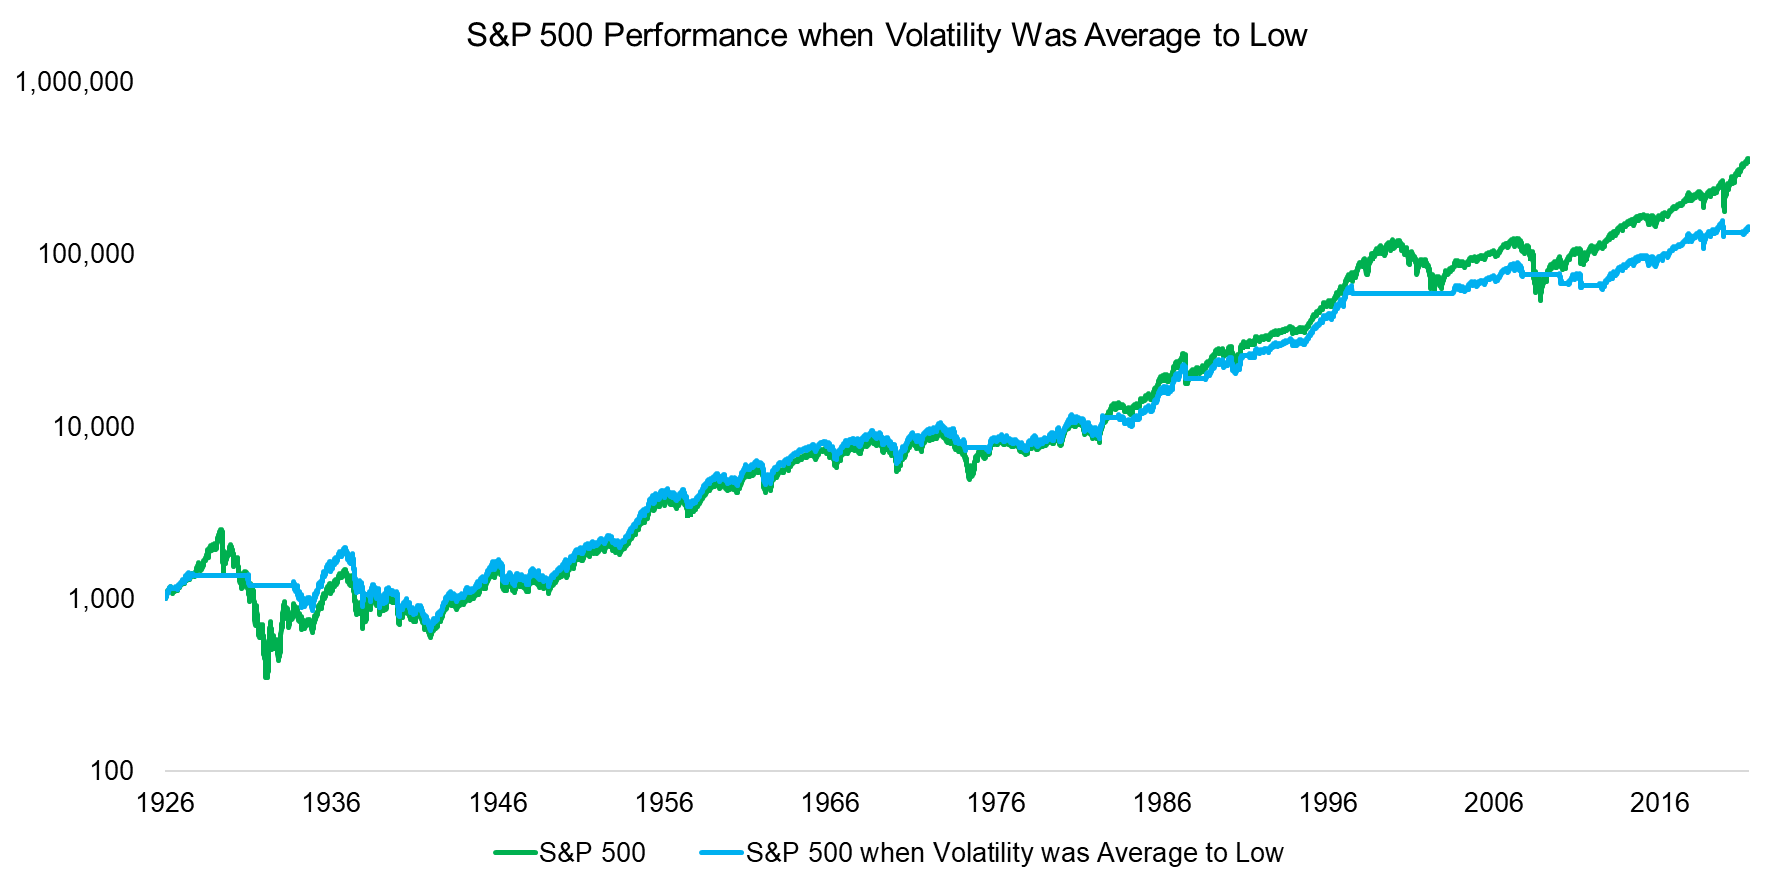 S&P 500 Performance when Volatility Was Average to Low